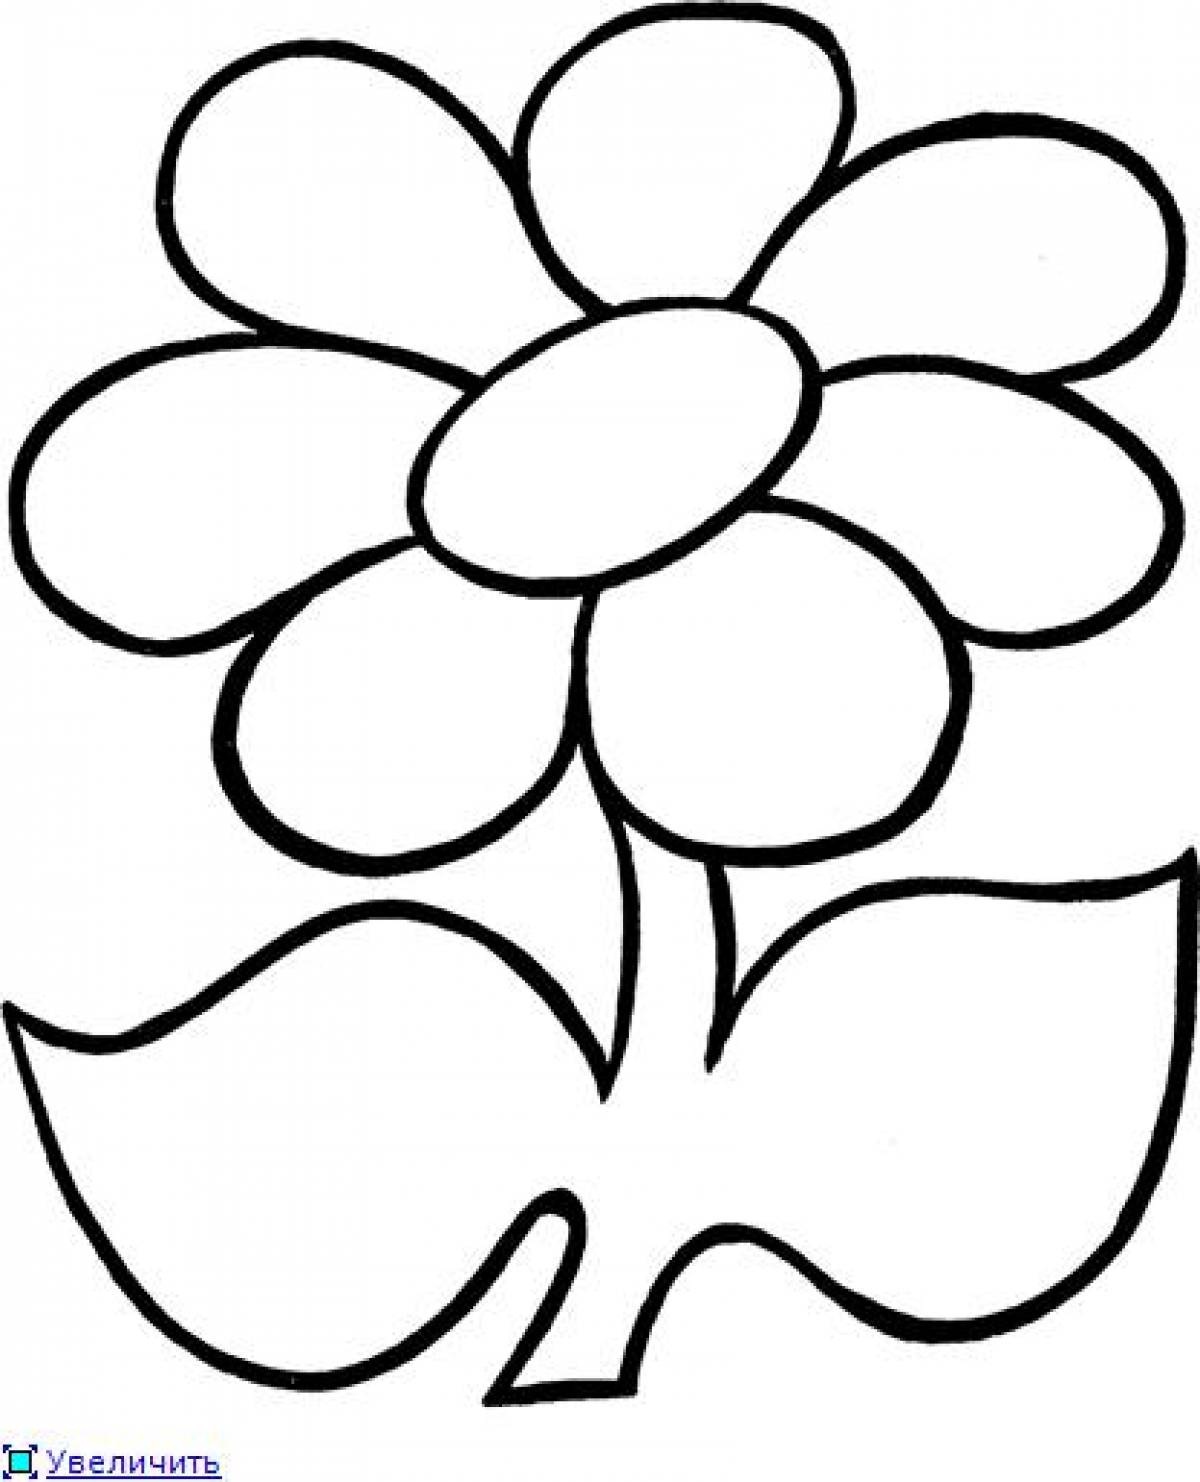 Children's coloring flower with leaves